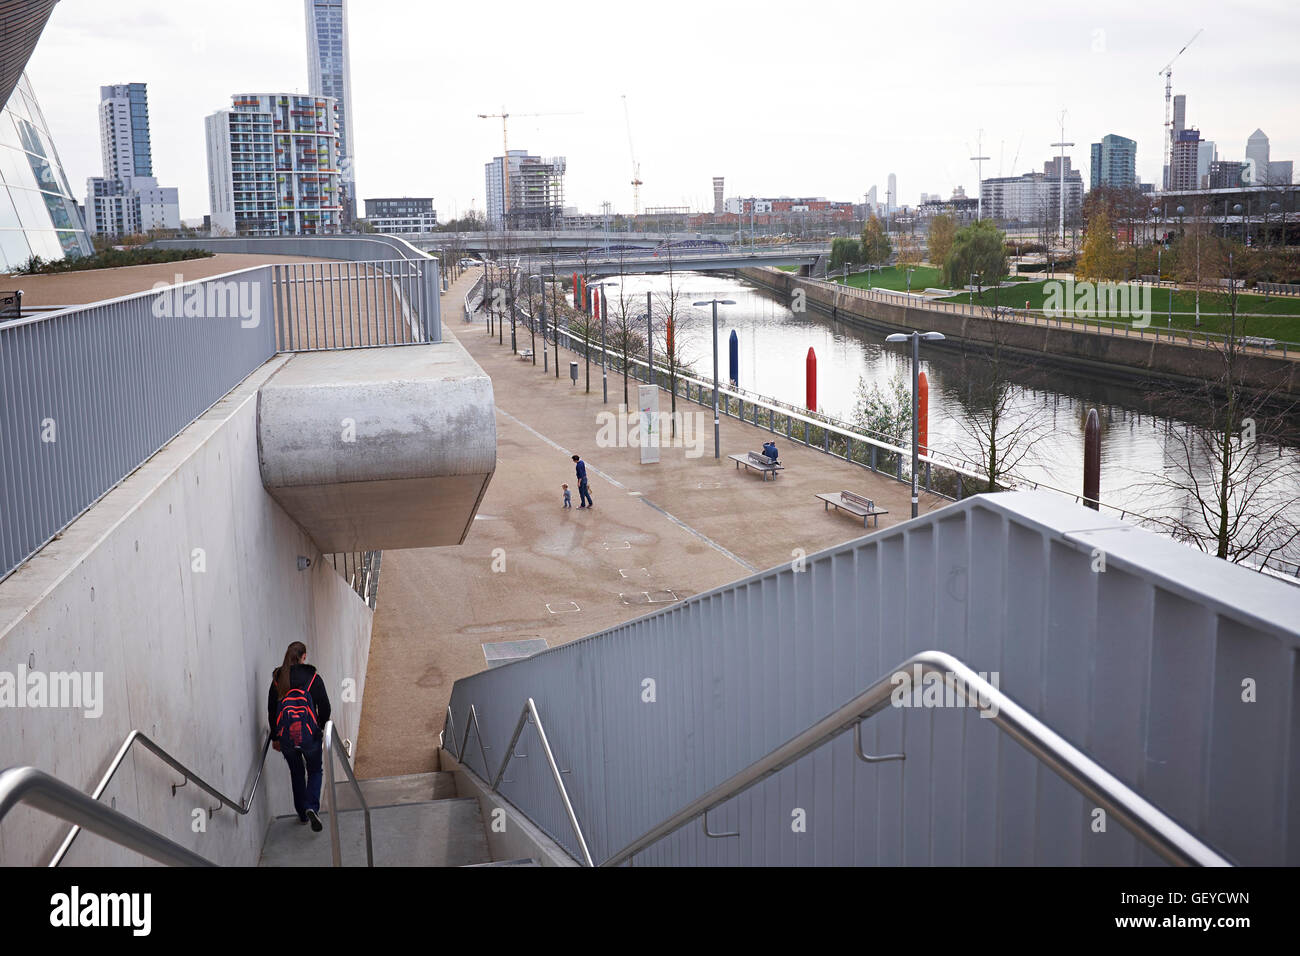 The areas surrounding the Olympic park in the Hackney Wick and Stratford areas, Tower Hamlets, UK. Stock Photo